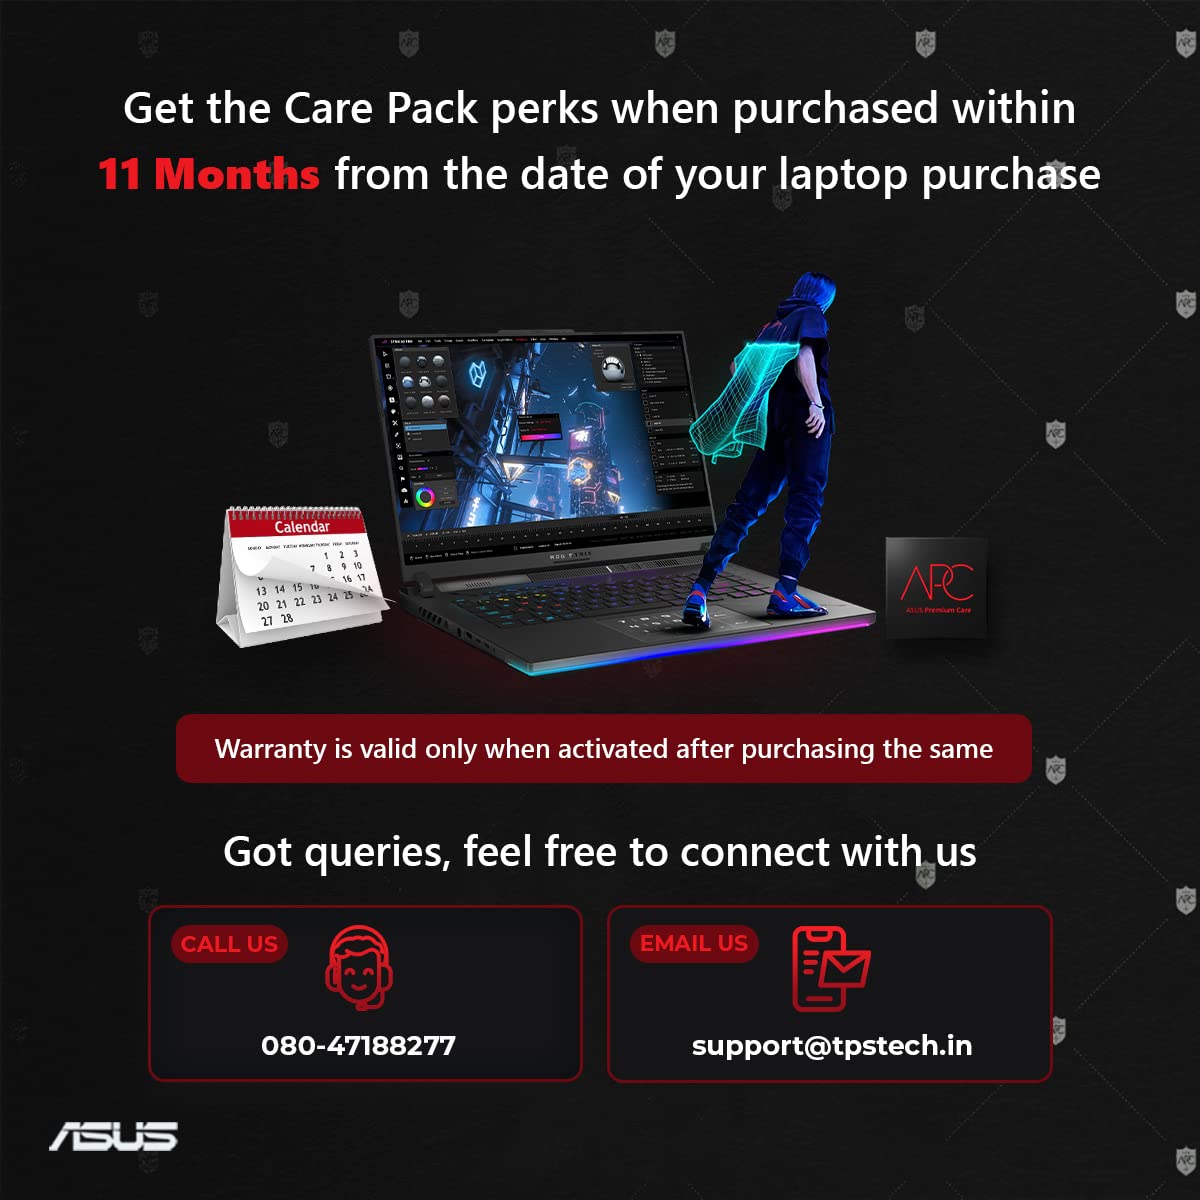 ASUS Premium Care 2 Year Extended Warranty for Gaming Laptops - NOT A LAPTOP